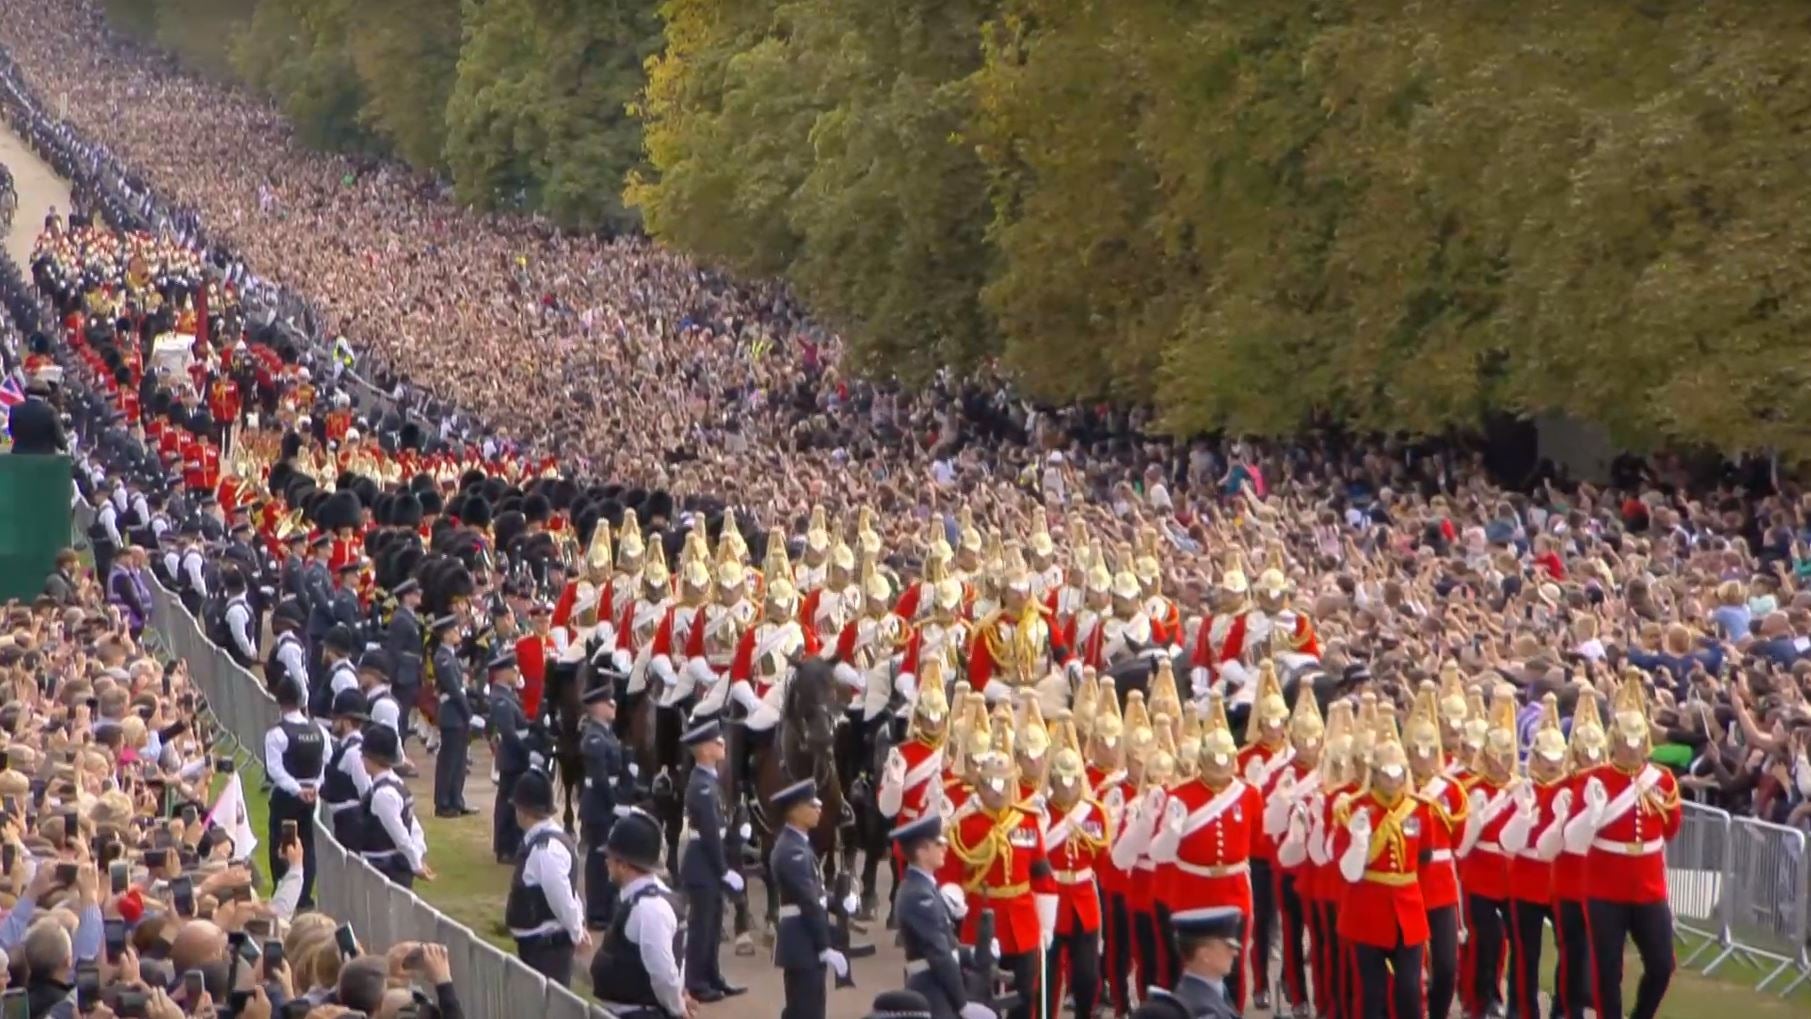 The procession along the Long Walk to Windsor Castle